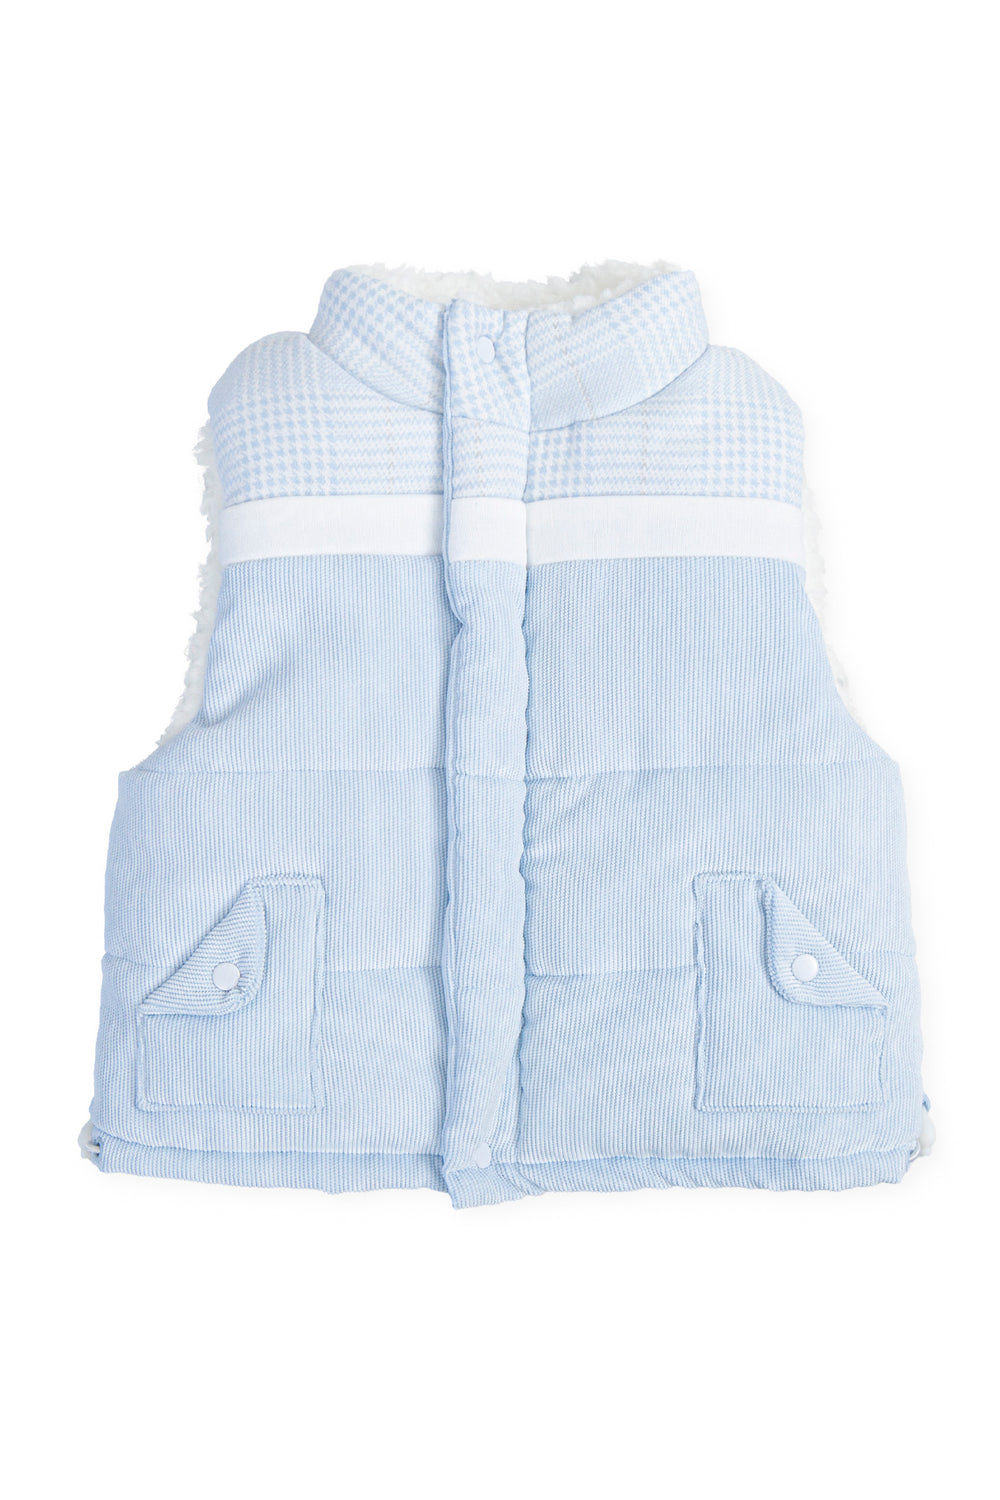 Tutto Piccolo "Arthur" Blue Cord Sherpa Lined Gilet | Millie and John